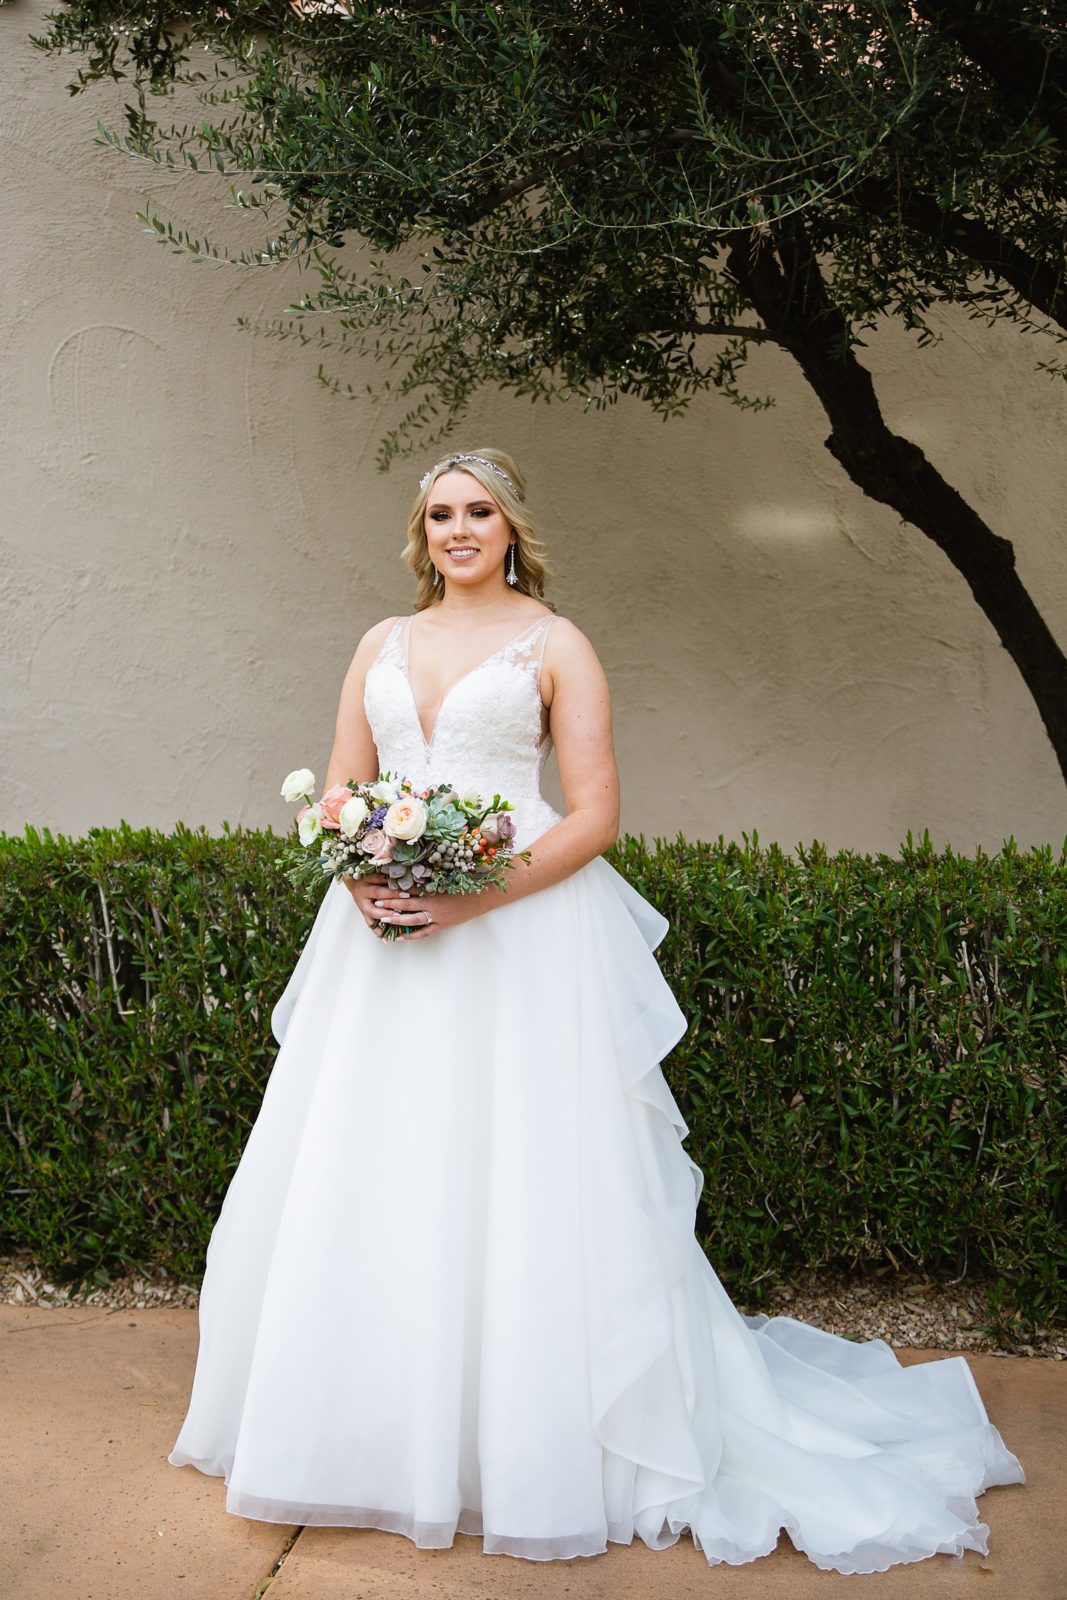 Bride in a romantic wedding dress with lace details by Arizona wedding photographer PMA Photography.